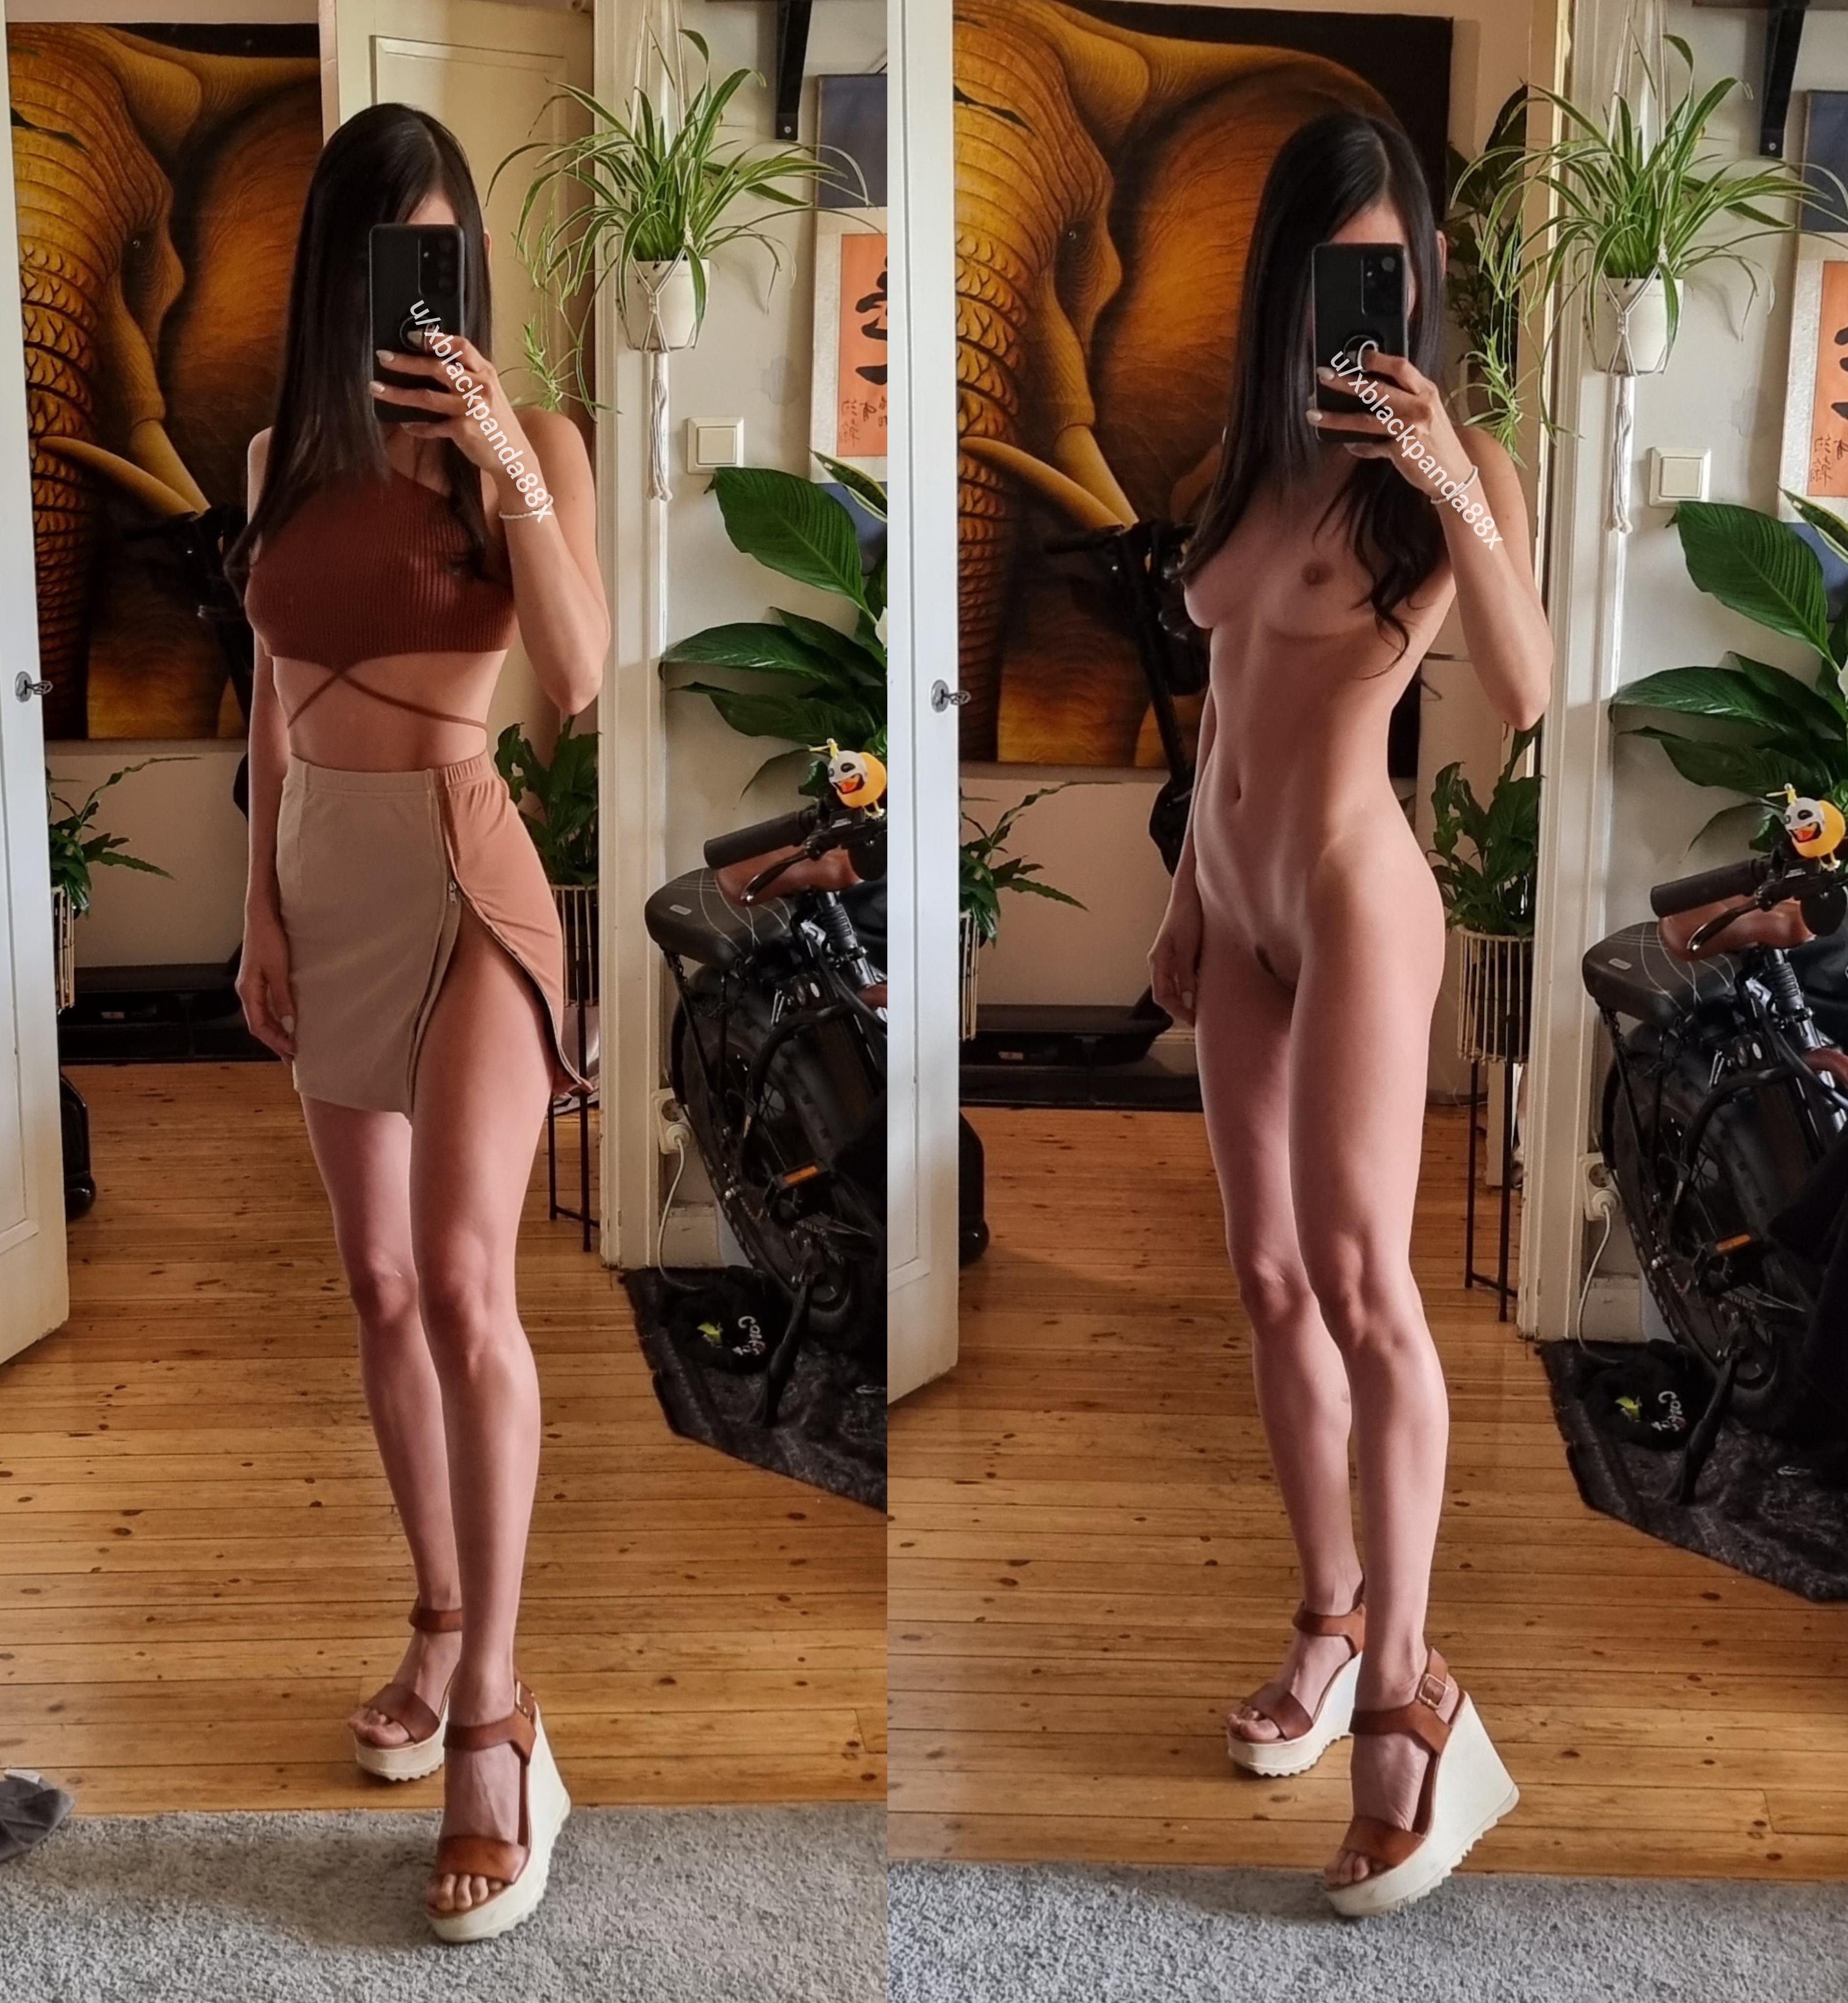 Tight dress obssession✌️34 year old Filipina mOm body pic